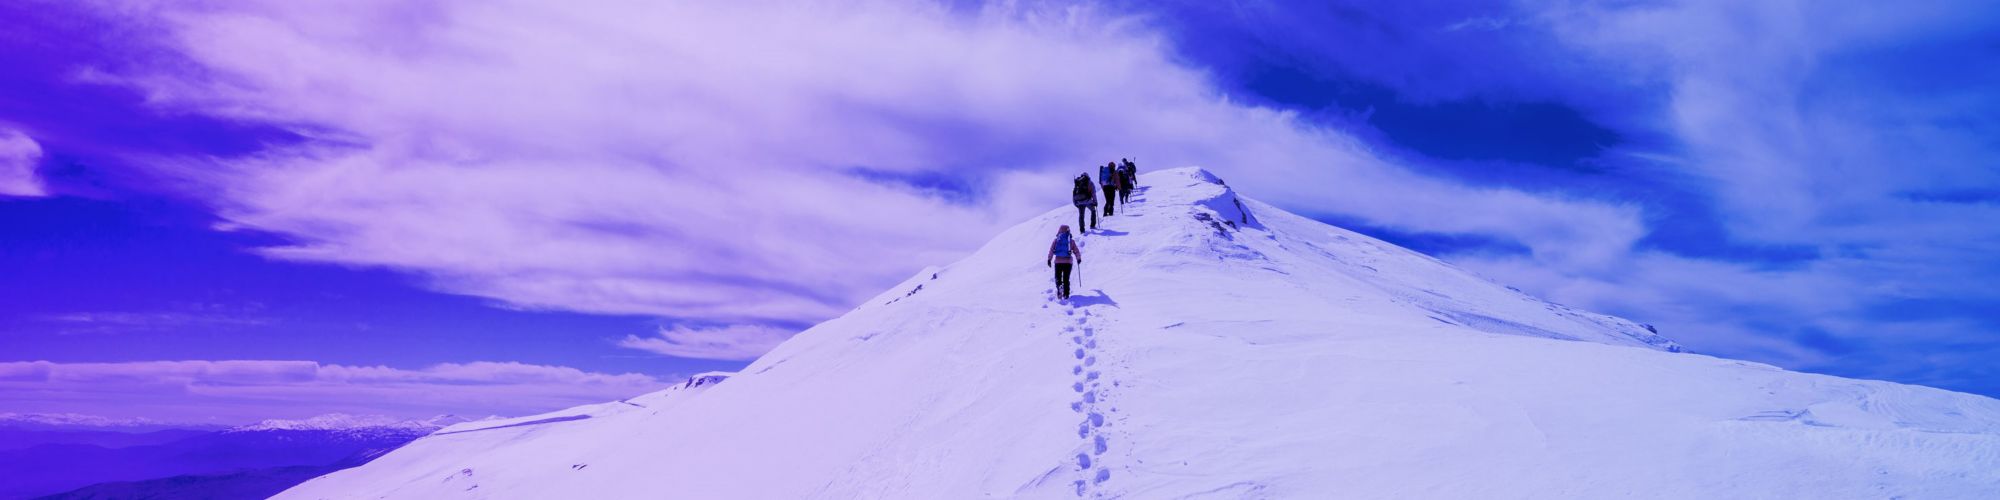 People hiking on mountain with snow